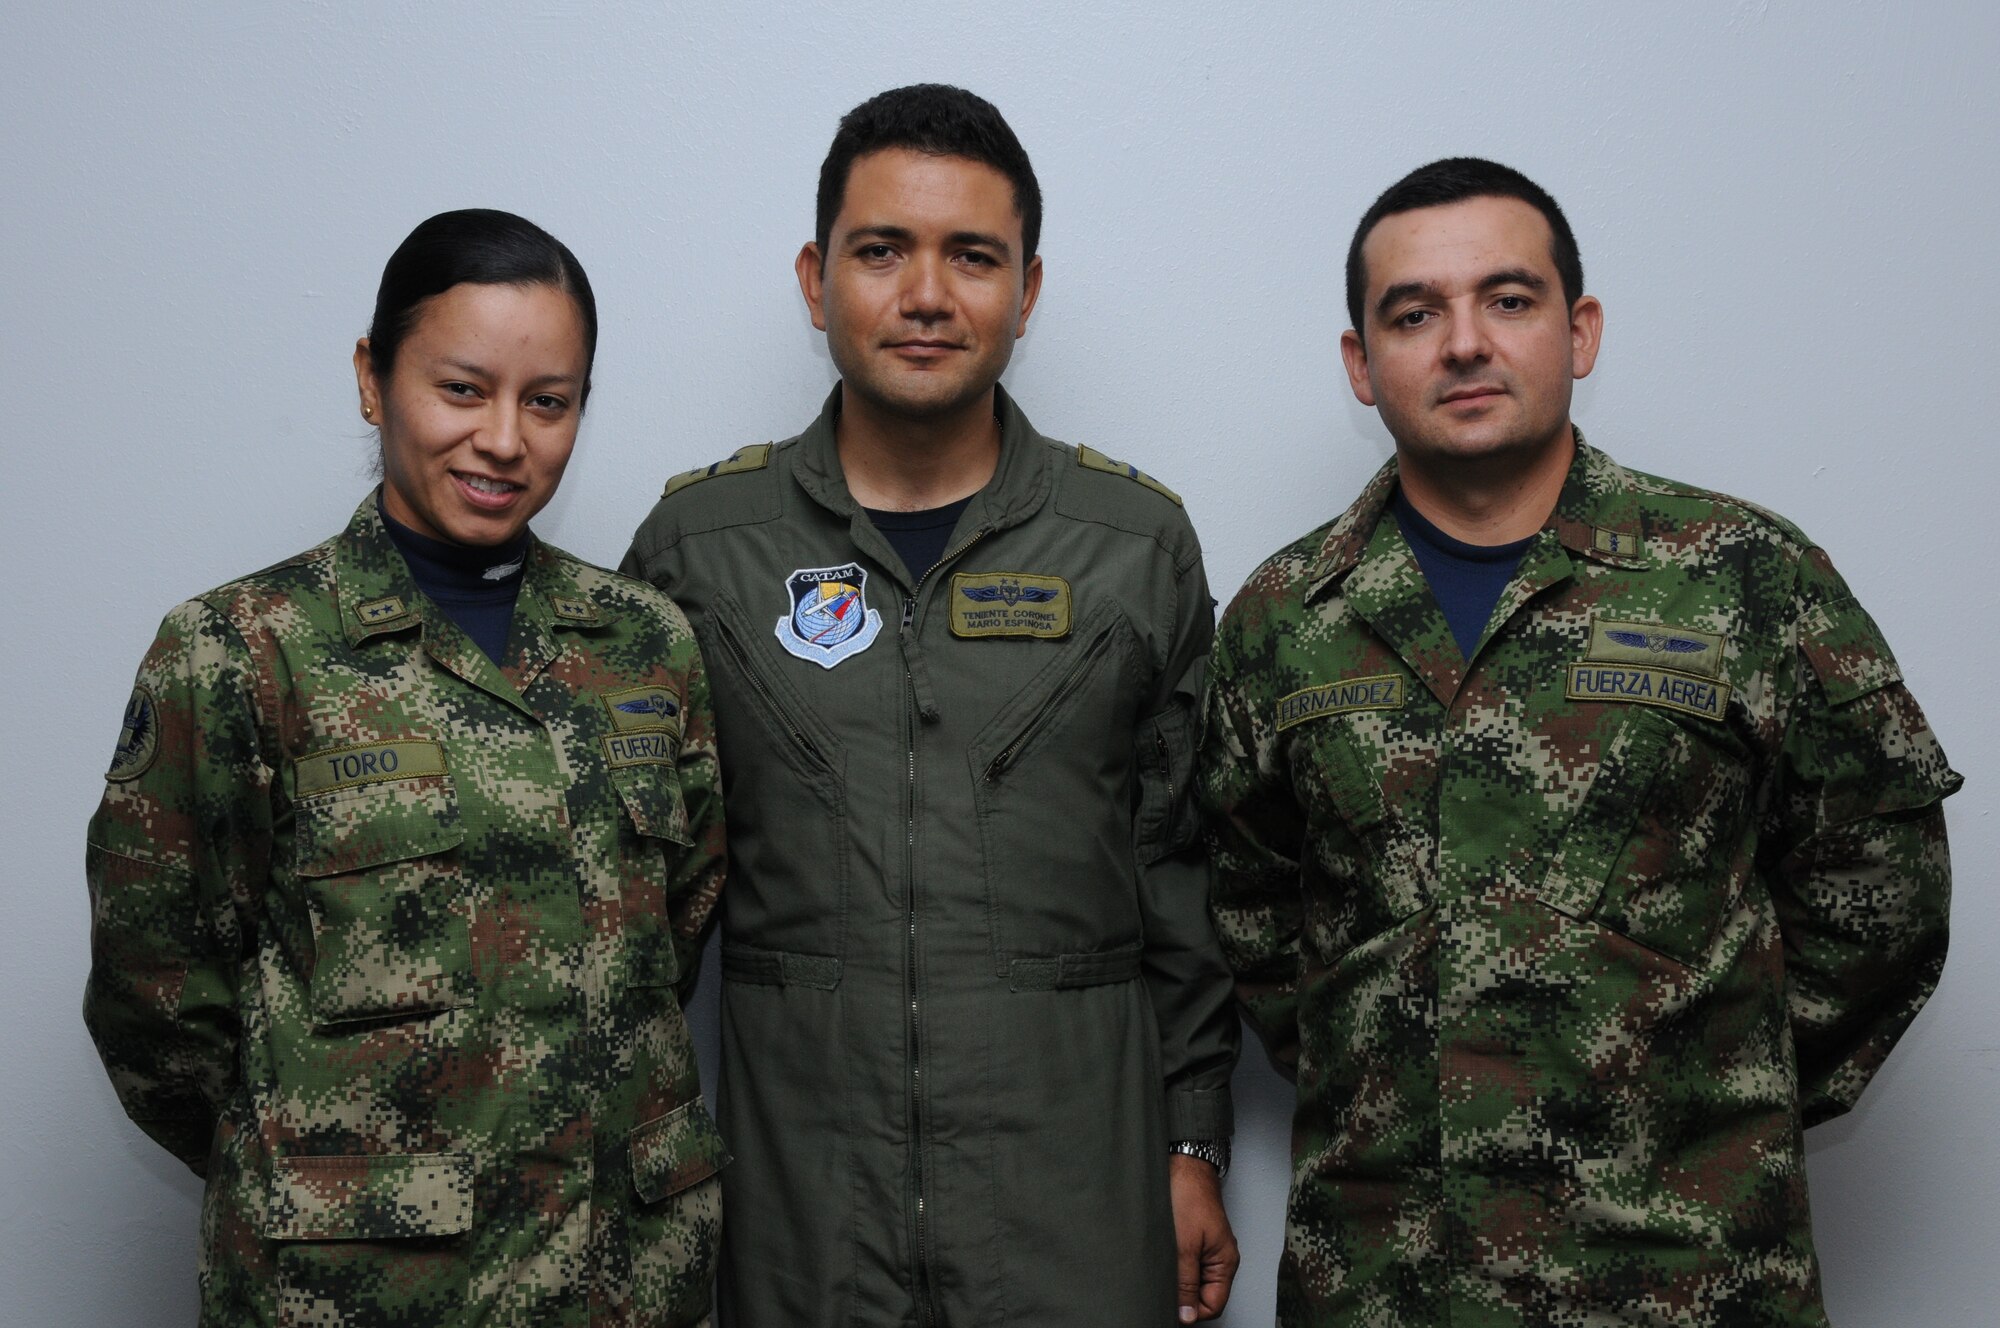 DAVIS-MONTHAN AIR FORCE BASE, Ariz. –  Lt. Col. Mario Espinosa, chief operations officer/doctrine officer for the Colombian air force (center), worked in planning operations  for PANAMAX 2012 alongside Air Forces Southern, Aug. 6-17.  PANAMAX is an annual U.S. Southern Command-sponsored exercise that focuses on ensuring the defense of the Panama Canal.  One of the most important benefits of multinational exercises like PANAMAX is the fact that all the participants were able to exchange their experiences, expertise gained new knowledge about each other’s culture and people.  These interactions strengthen our bonds across the region and foster long-lasting friendships and an understanding among the partner nations, ultimately benefiting the security of the region.